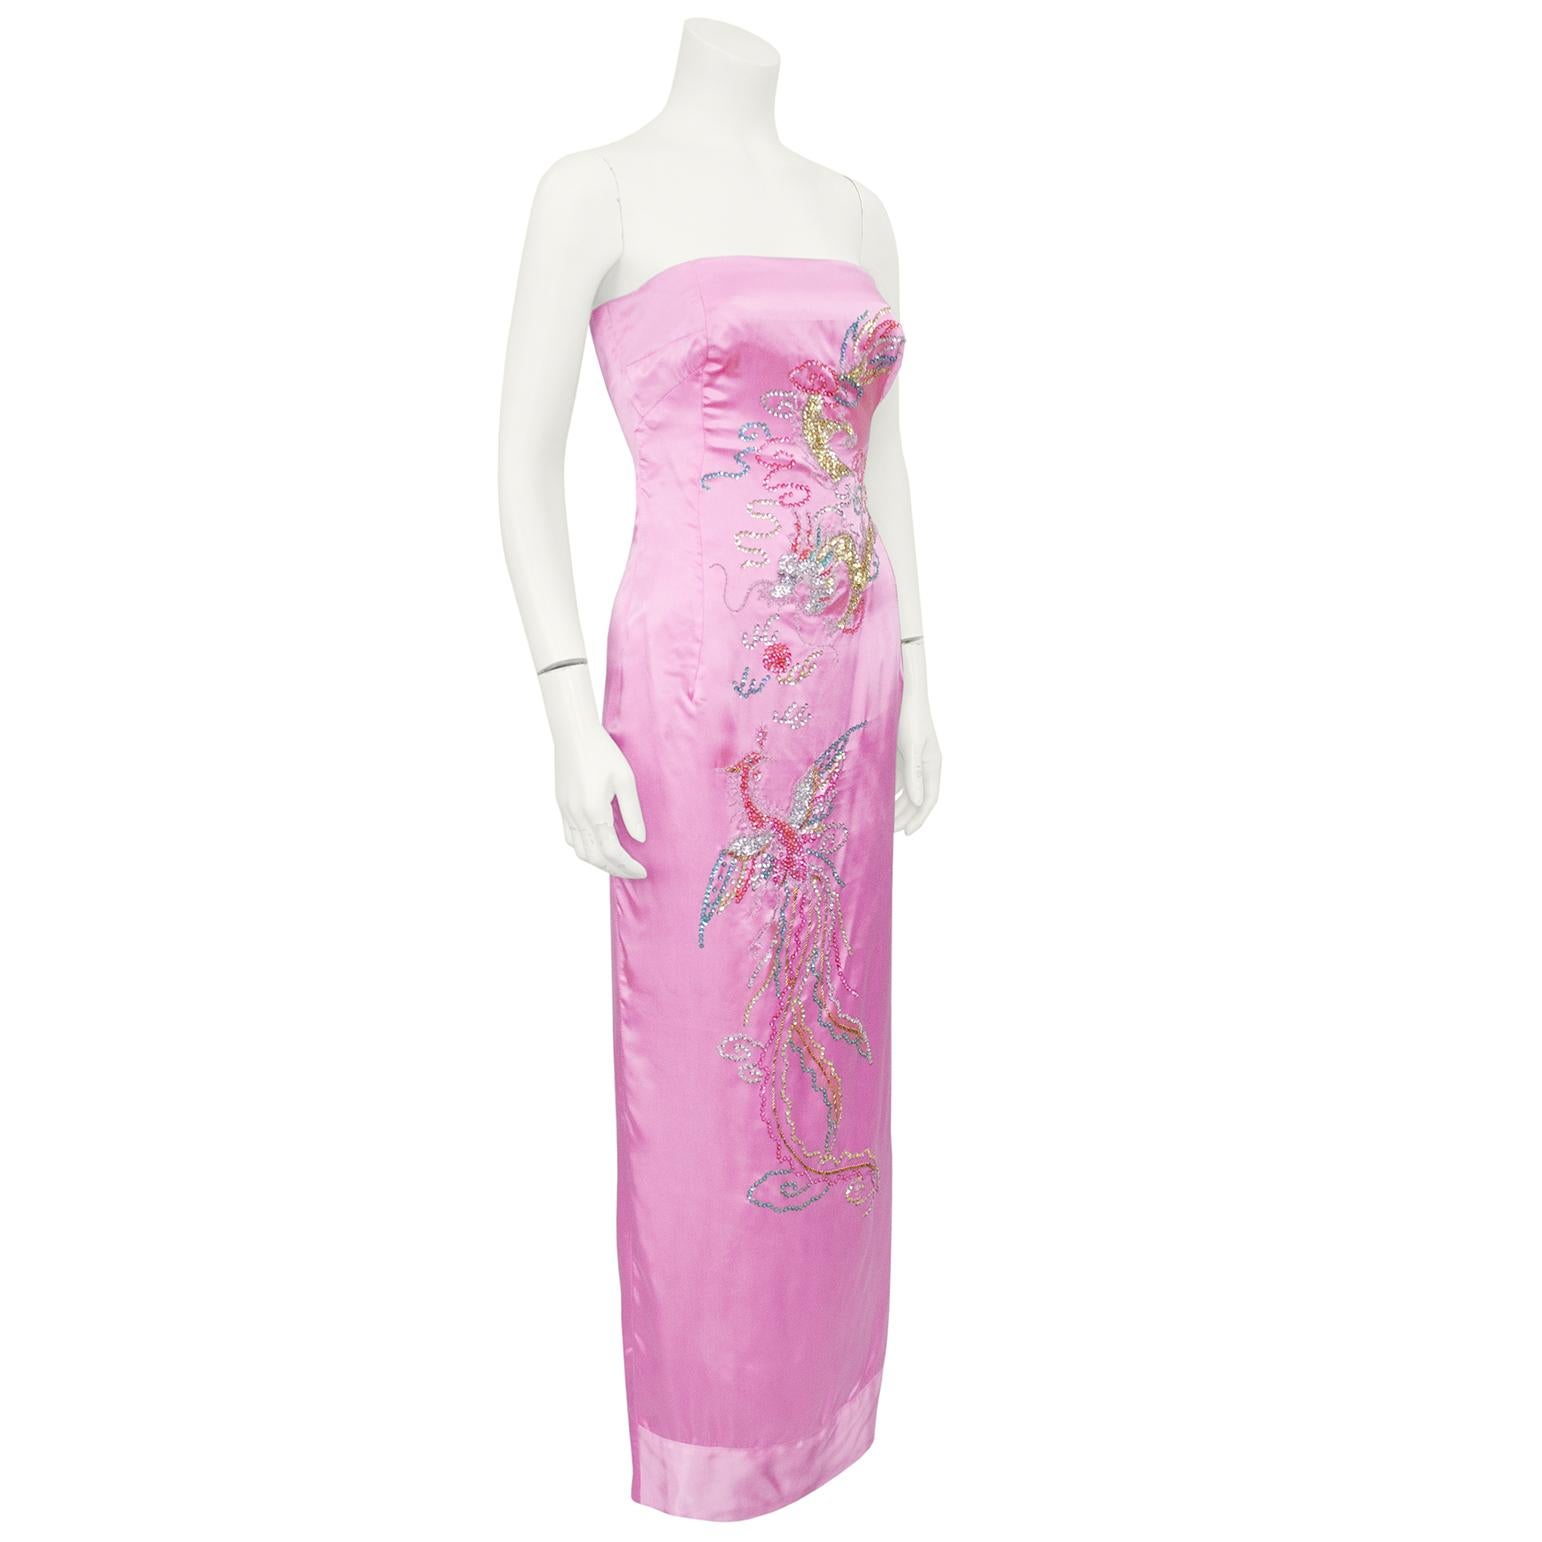 Very beautiful pink silk satin strapless gown from the 1960s. A custom copy of an original from the 1940's. Hand embellished with Chinoiserie sequin and beaded dragon and phoenix across the front. Fitted through the body. Tea length column skirt